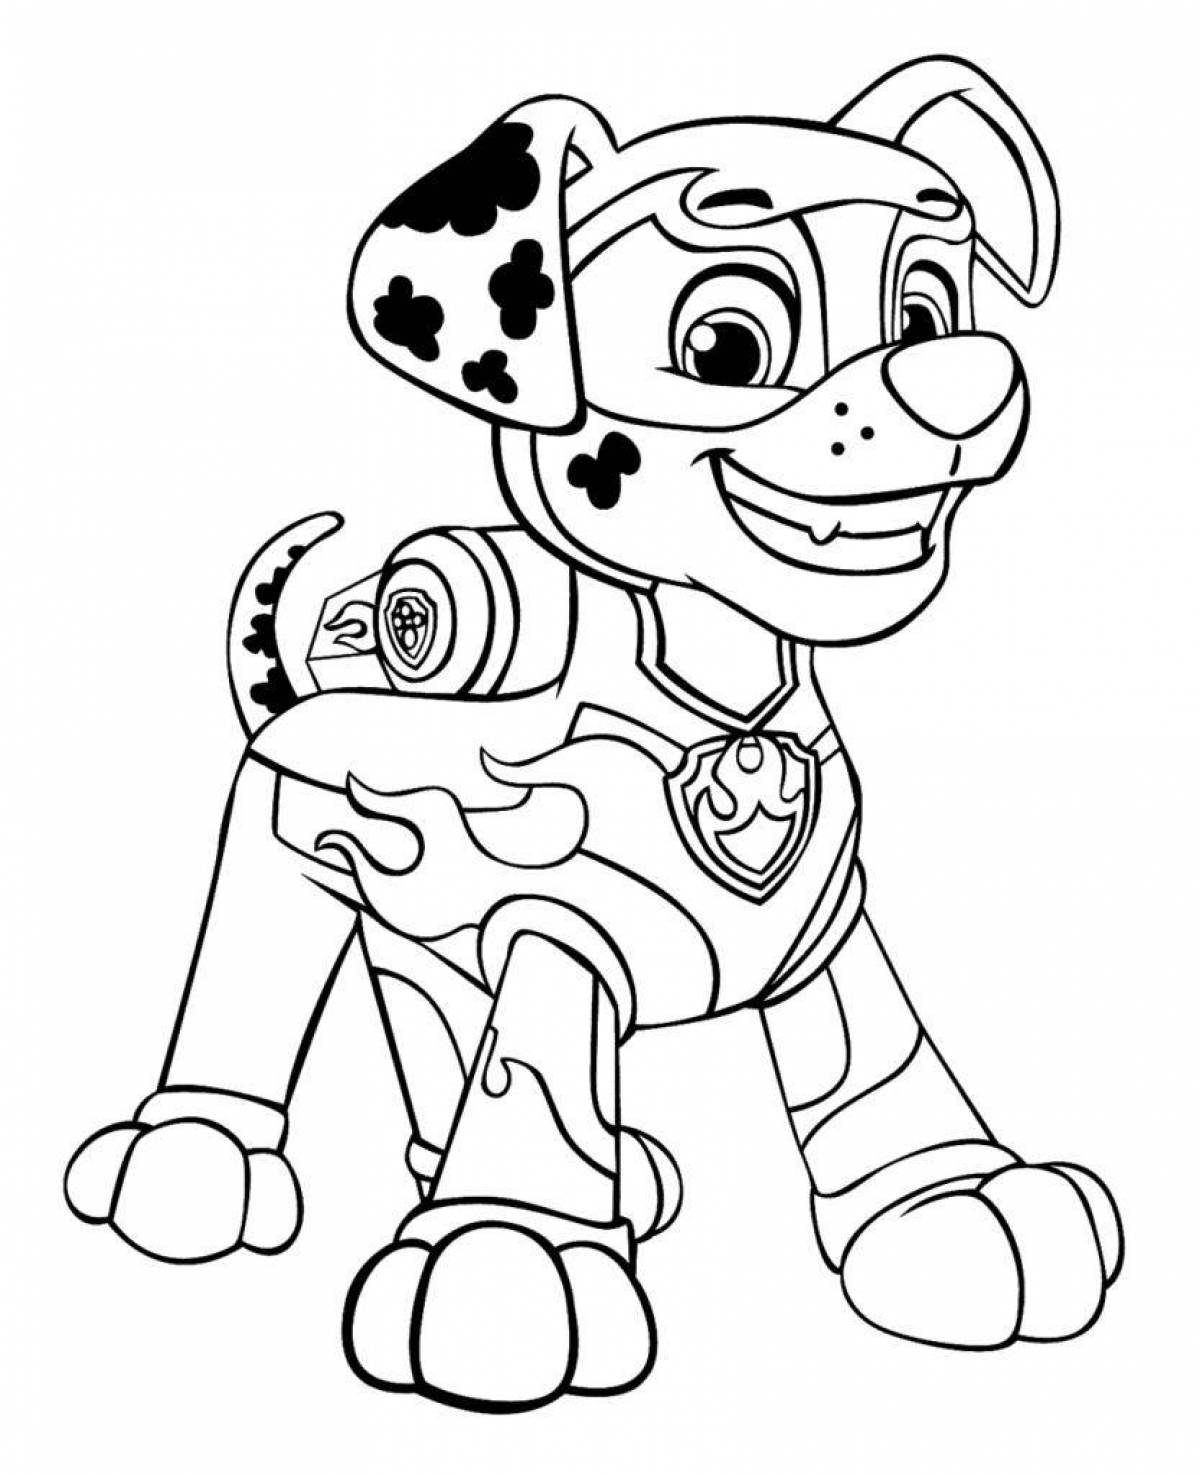 Coloring page playful super bear